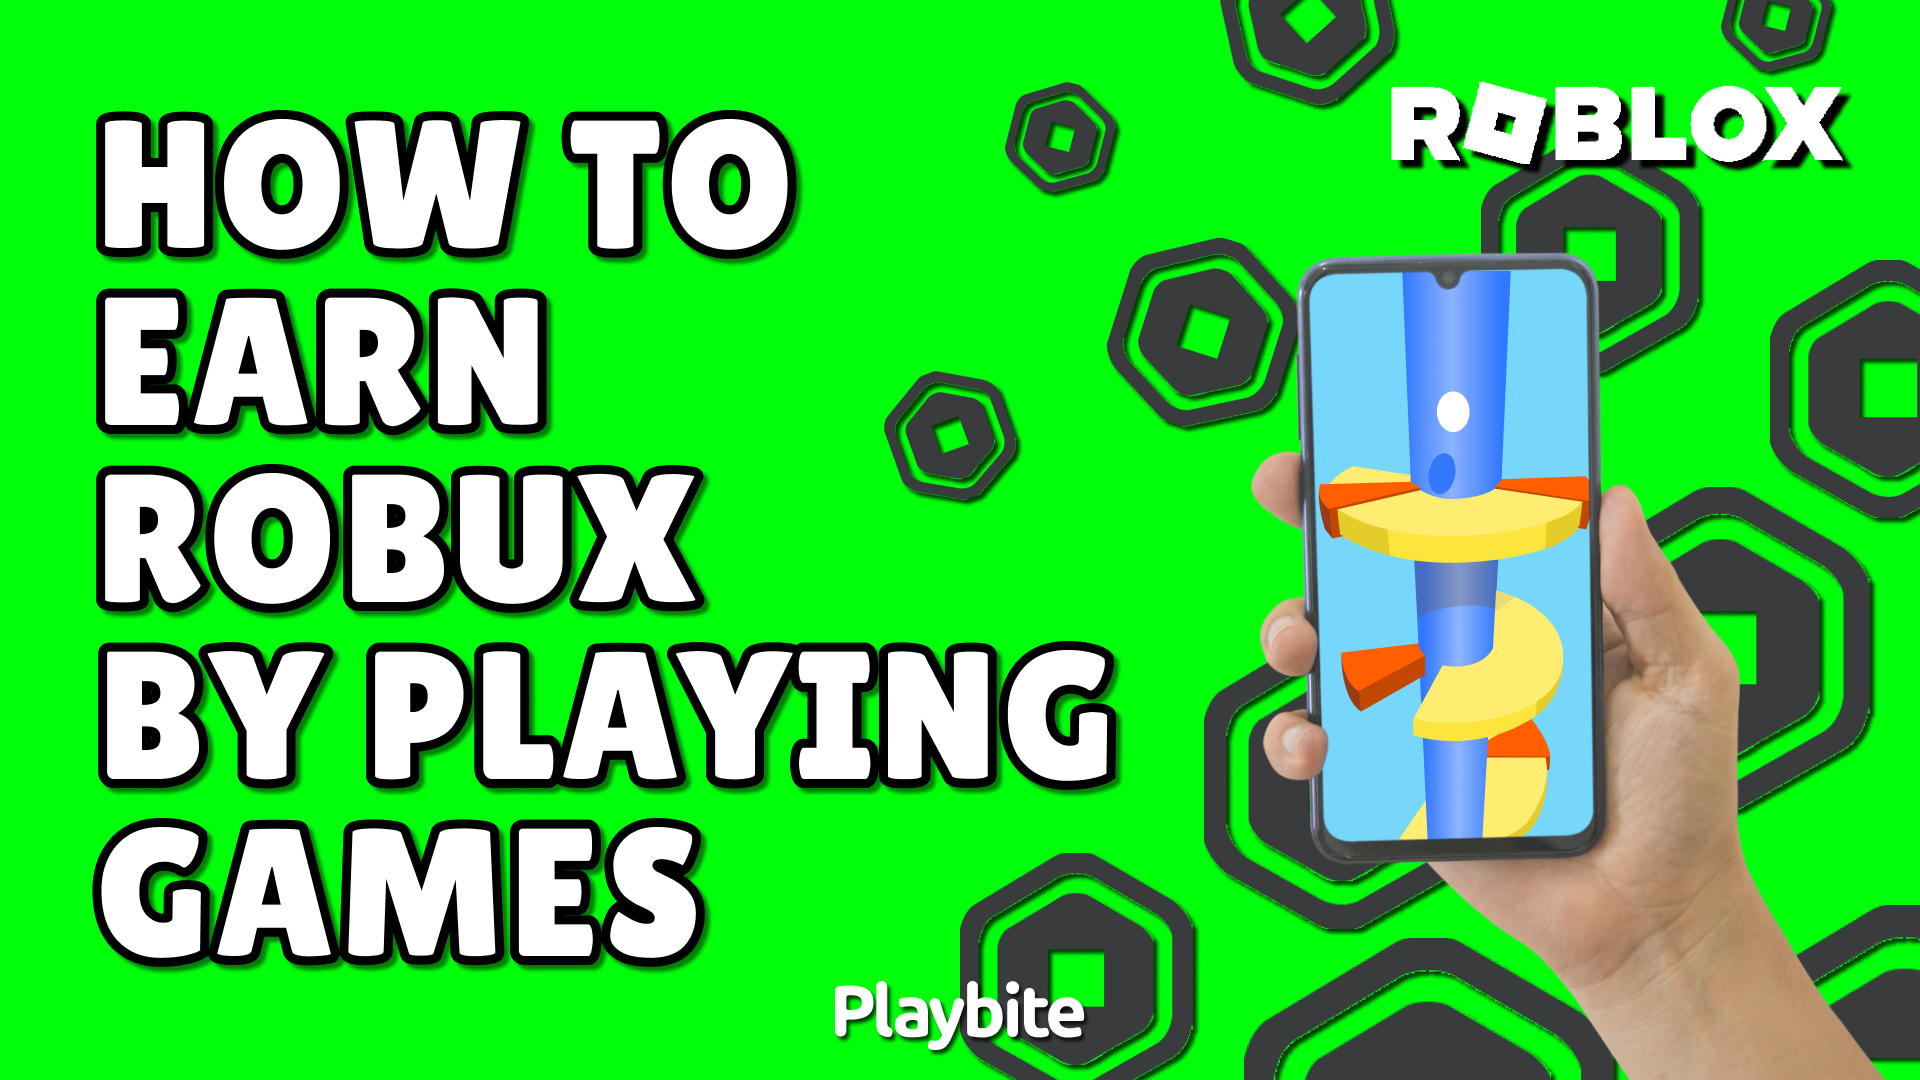 How To Earn Robux By Playing Games